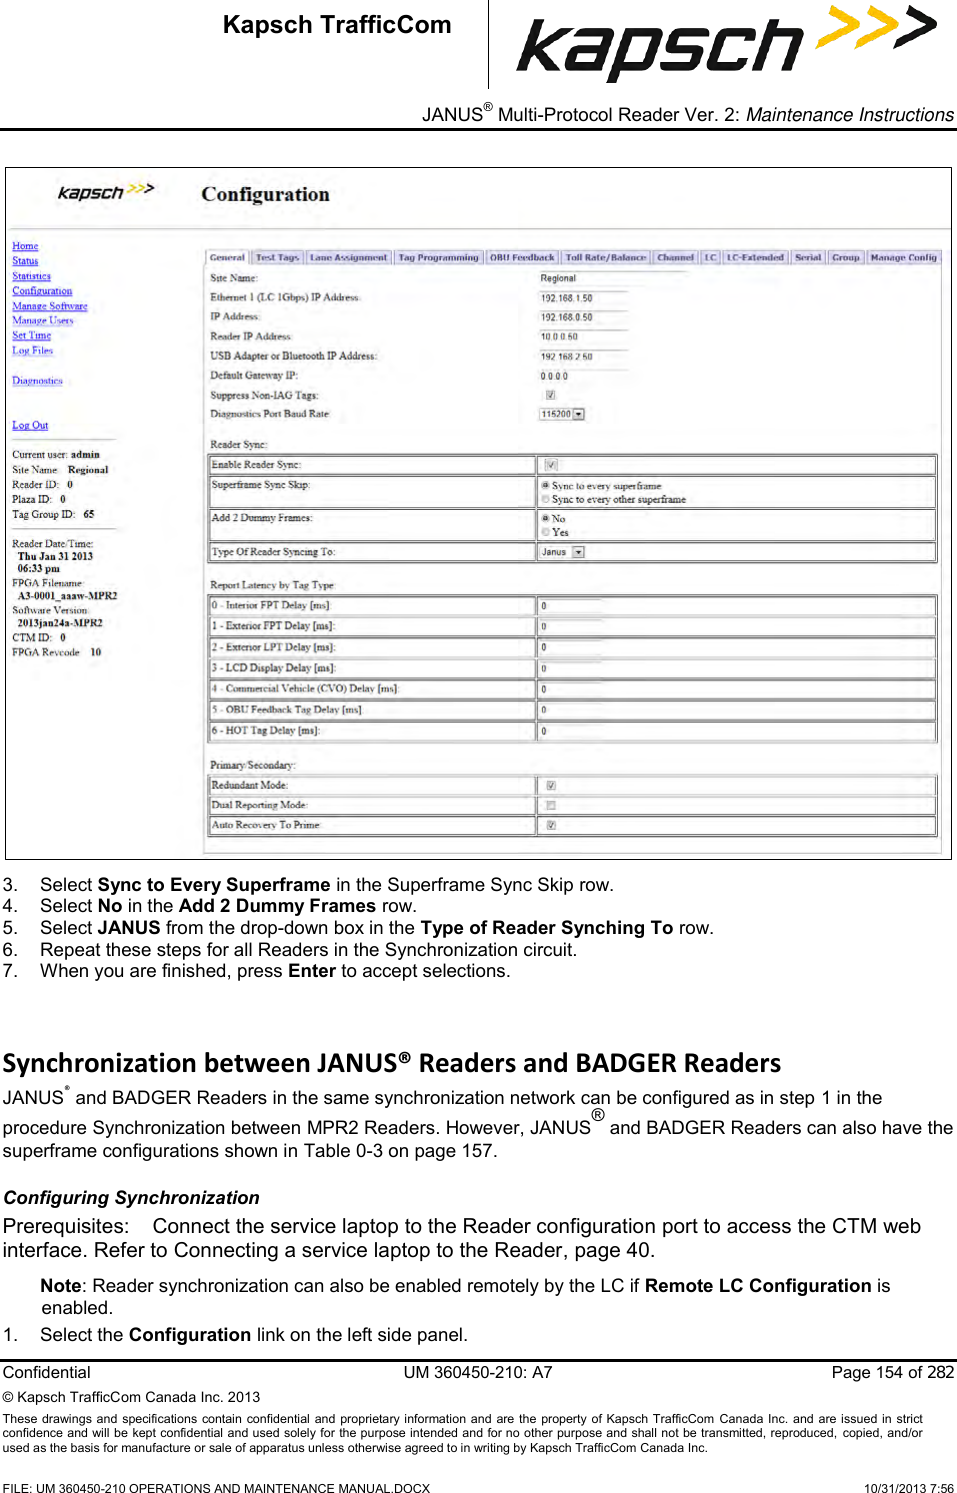 _ JANUS® Multi-Protocol Reader Ver. 2: Maintenance Instructions  Confidential  UM 360450-210: A7  Page 154 of 282 © Kapsch TrafficCom Canada Inc. 2013 These  drawings and specifications  contain confidential and proprietary information and are the property of Kapsch TrafficCom  Canada Inc.  and are issued in strict confidence and will be kept confidential and used solely for the purpose intended and for no other purpose and shall not be transmitted, reproduced, copied, and/or used as the basis for manufacture or sale of apparatus unless otherwise agreed to in writing by Kapsch TrafficCom Canada Inc.    FILE: UM 360450-210 OPERATIONS AND MAINTENANCE MANUAL.DOCX    10/31/2013 7:56 Kapsch TrafficCom  3.  Select Sync to Every Superframe in the Superframe Sync Skip row. 4.  Select No in the Add 2 Dummy Frames row. 5.  Select JANUS from the drop-down box in the Type of Reader Synching To row.  6.  Repeat these steps for all Readers in the Synchronization circuit. 7.  When you are finished, press Enter to accept selections. Synchronization between JANUS® Readers and BADGER Readers JANUS® and BADGER Readers in the same synchronization network can be configured as in step 1 in the procedure Synchronization between MPR2 Readers. However, JANUS® and BADGER Readers can also have the superframe configurations shown in Table 0-3 on page 157. Configuring Synchronization Prerequisites:  Connect the service laptop to the Reader configuration port to access the CTM web interface. Refer to Connecting a service laptop to the Reader, page 40. Note: Reader synchronization can also be enabled remotely by the LC if Remote LC Configuration is enabled. 1.  Select the Configuration link on the left side panel. 